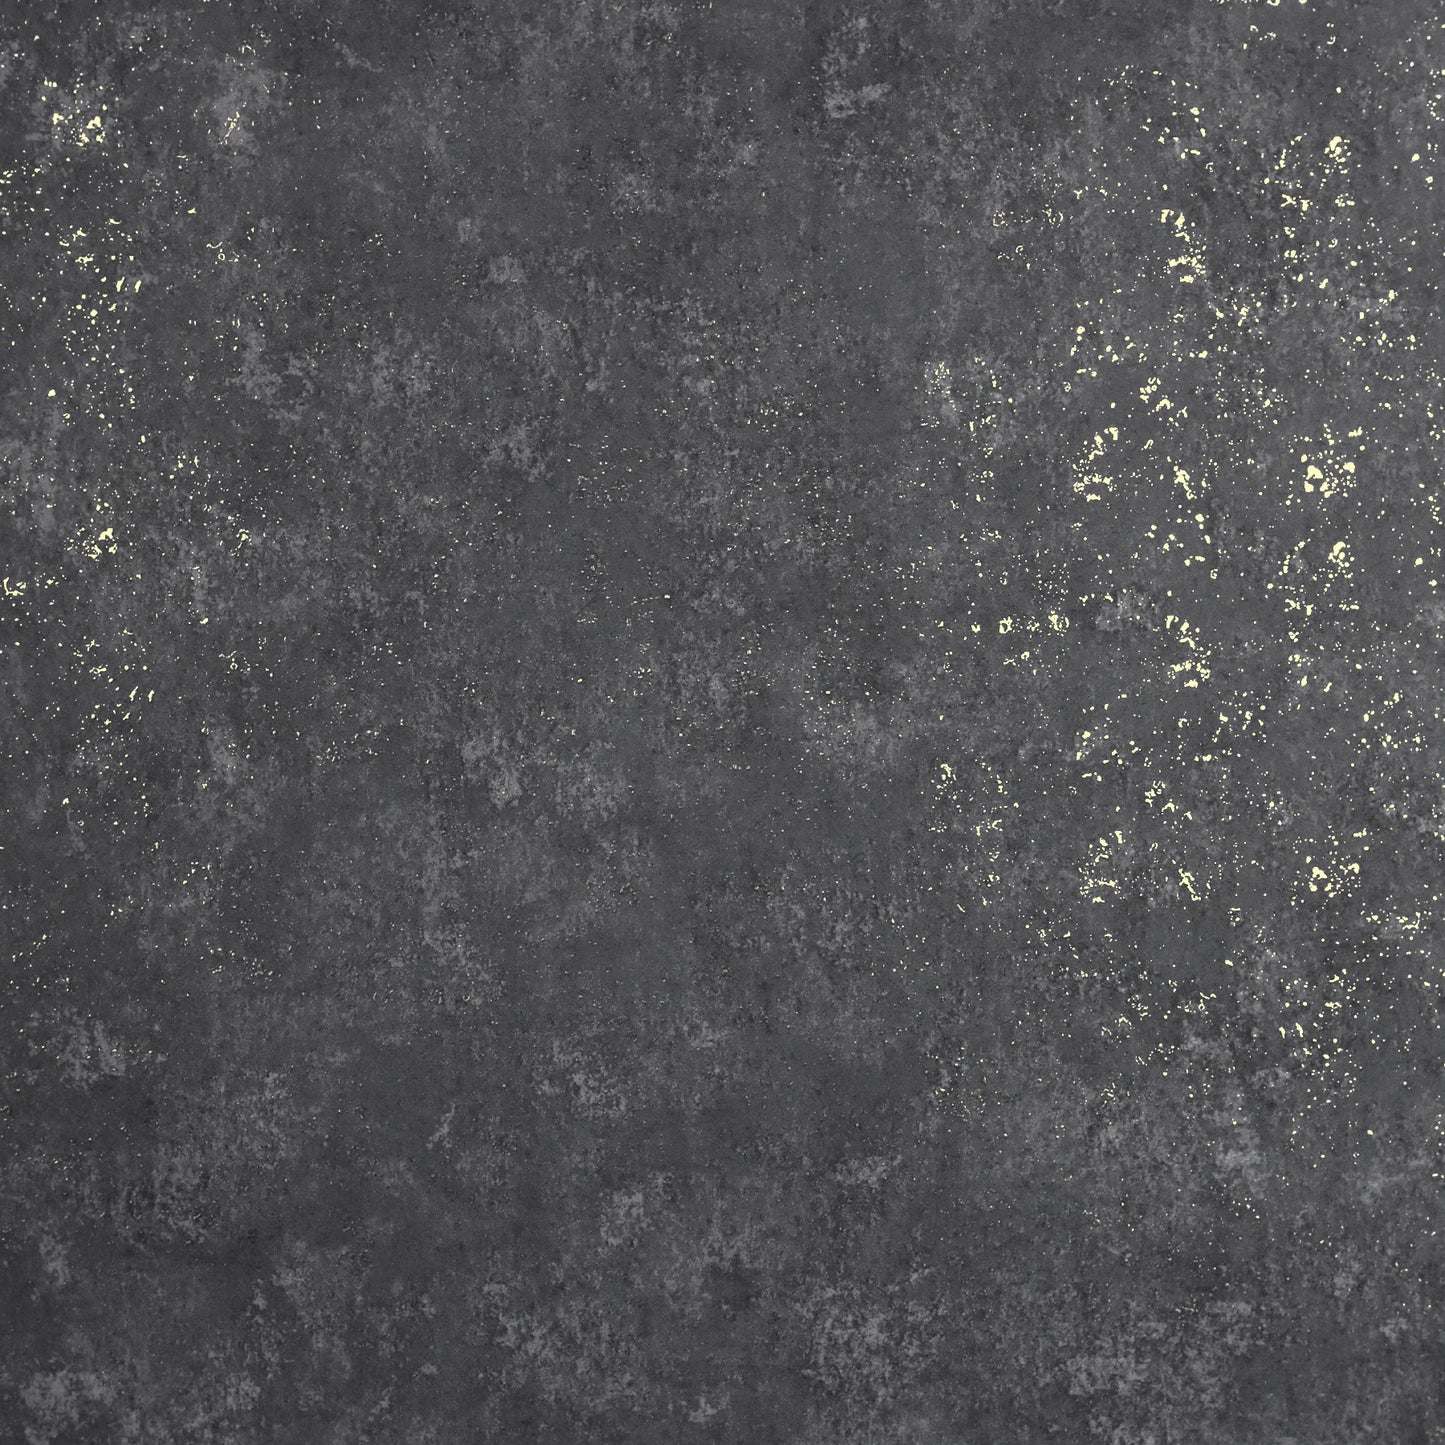 Order 2927-00701 Polished Drizzle Charcoal Speckle Charcoal Brewster Wallpaper